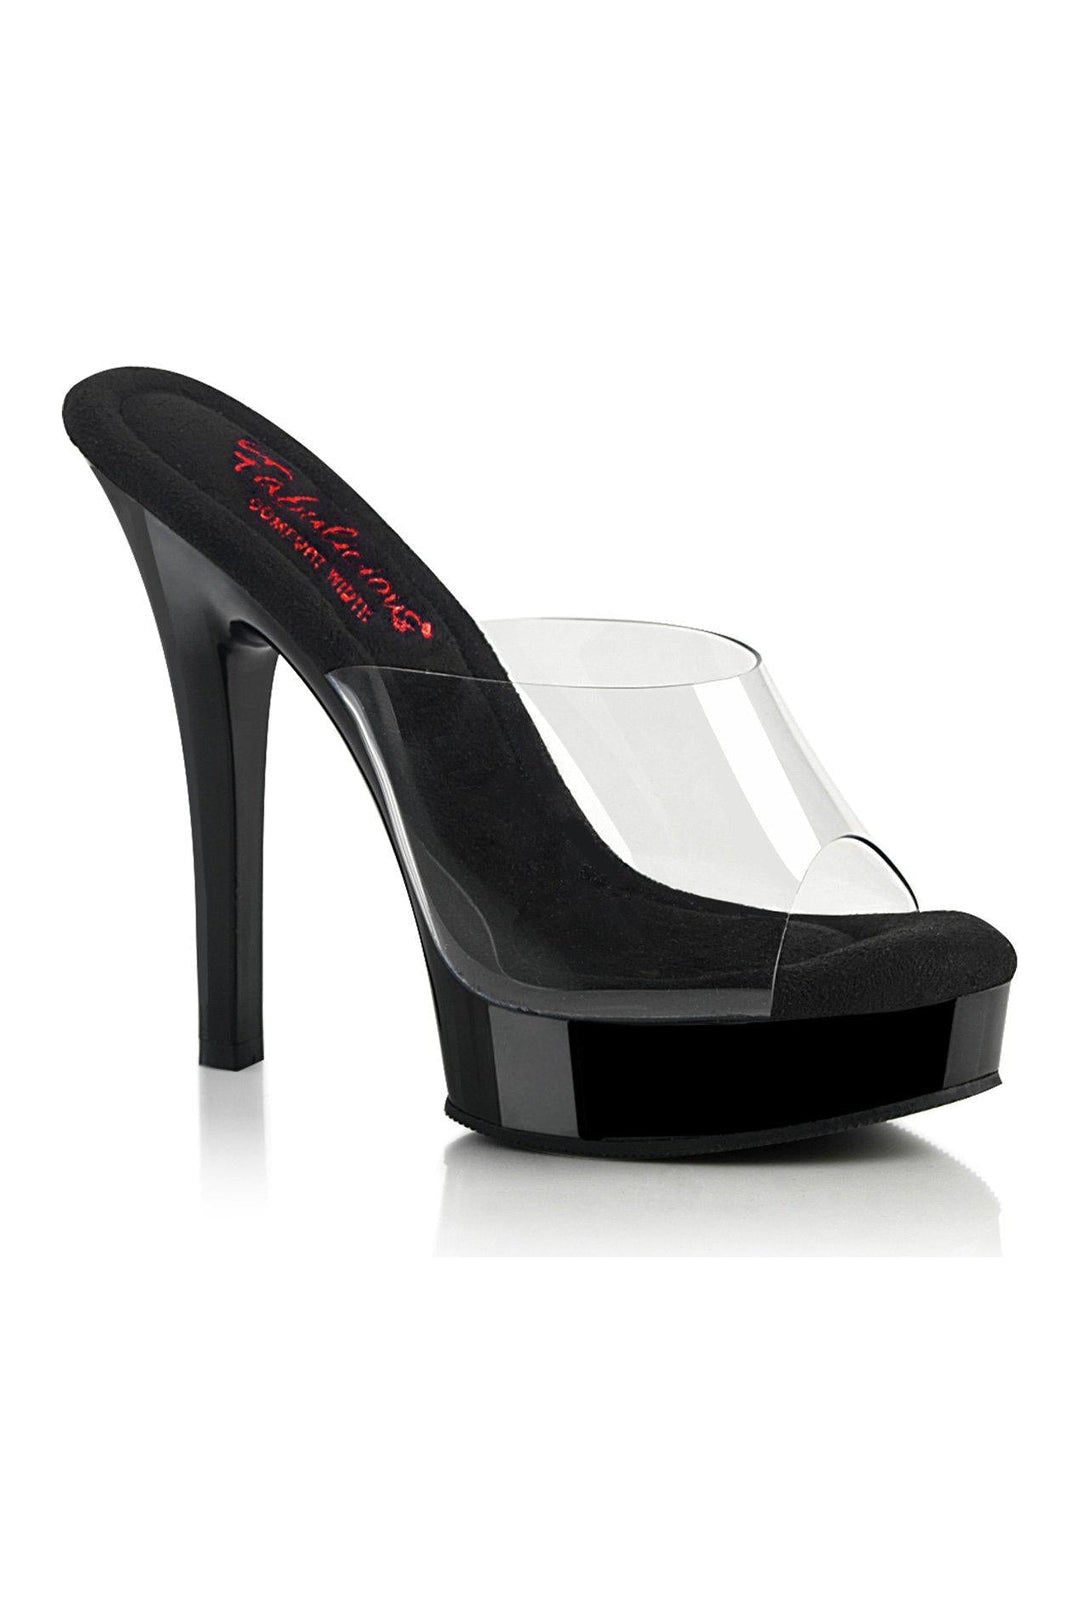 MAJESTY-501 Slide | Clear Vinyl-Slides-Fabulicious-Clear-8-Vinyl-SEXYSHOES.COM